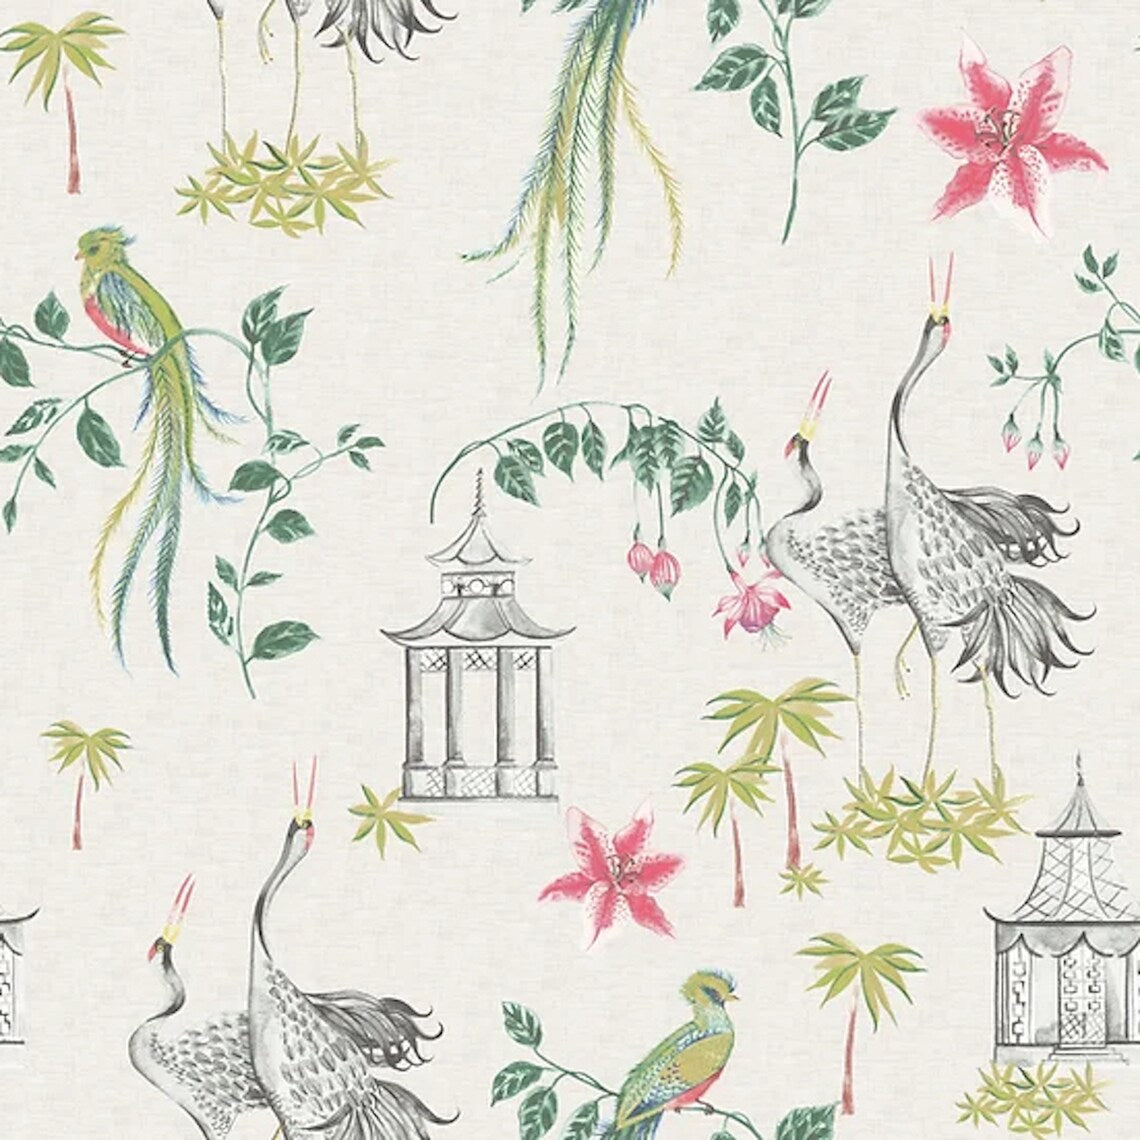 Bed Scarf in Let It Crane Avocado Oriental Toile, Multicolor Chinoiserie